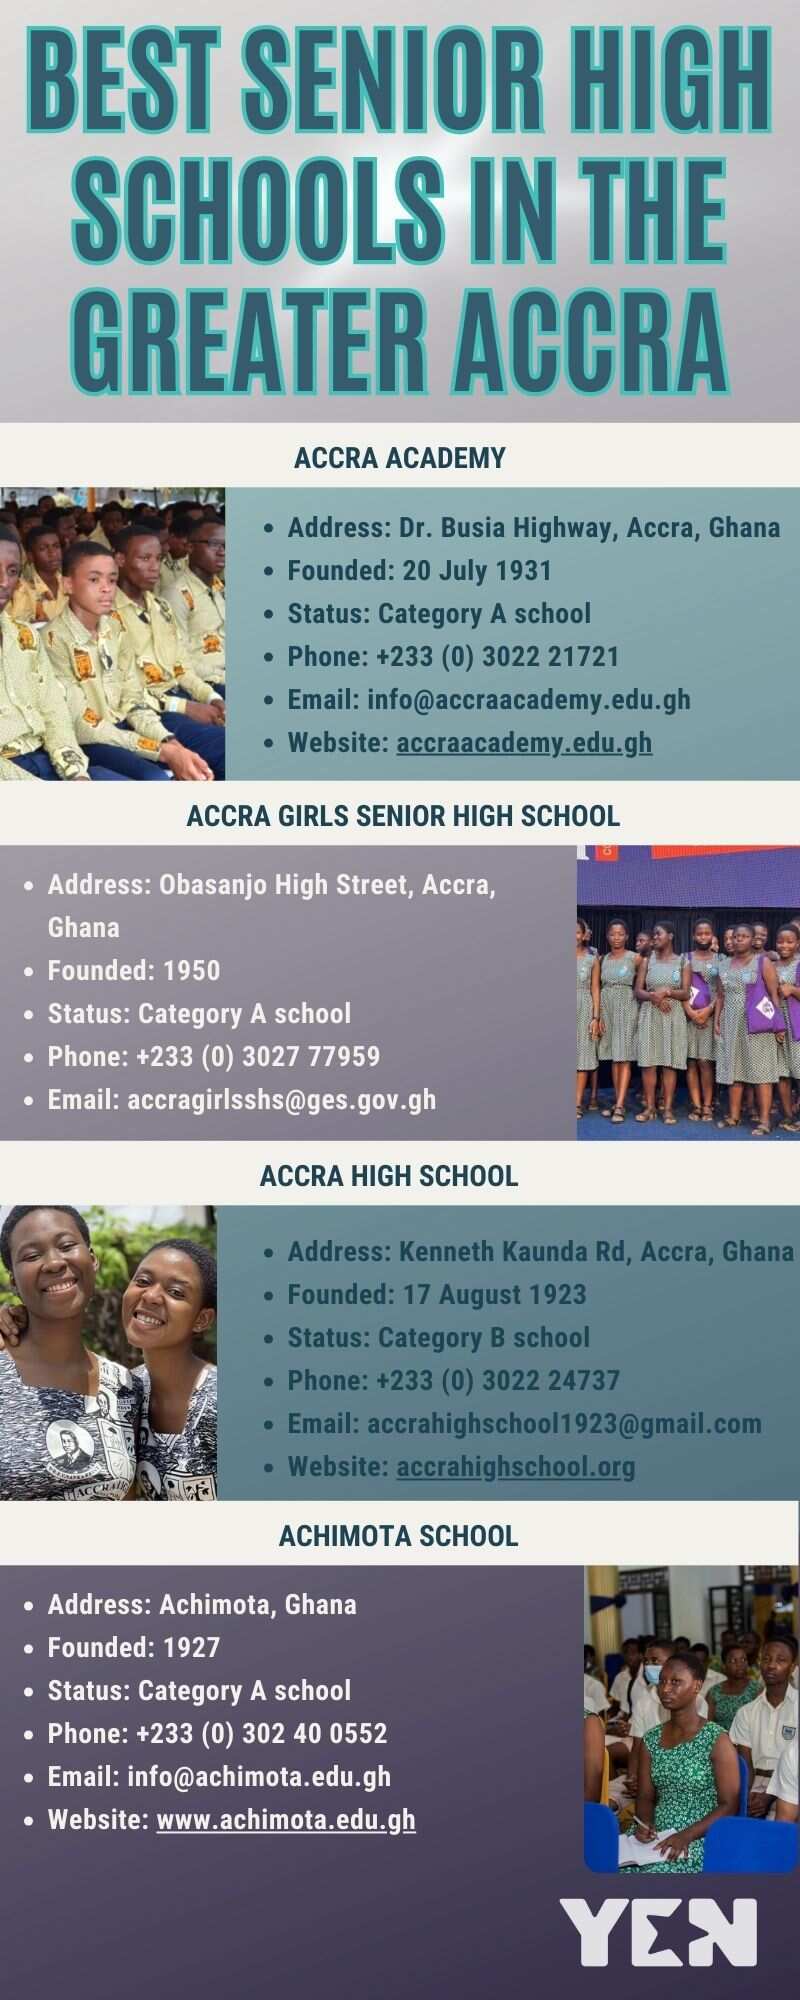 Best senior high schools in the Greater Accra